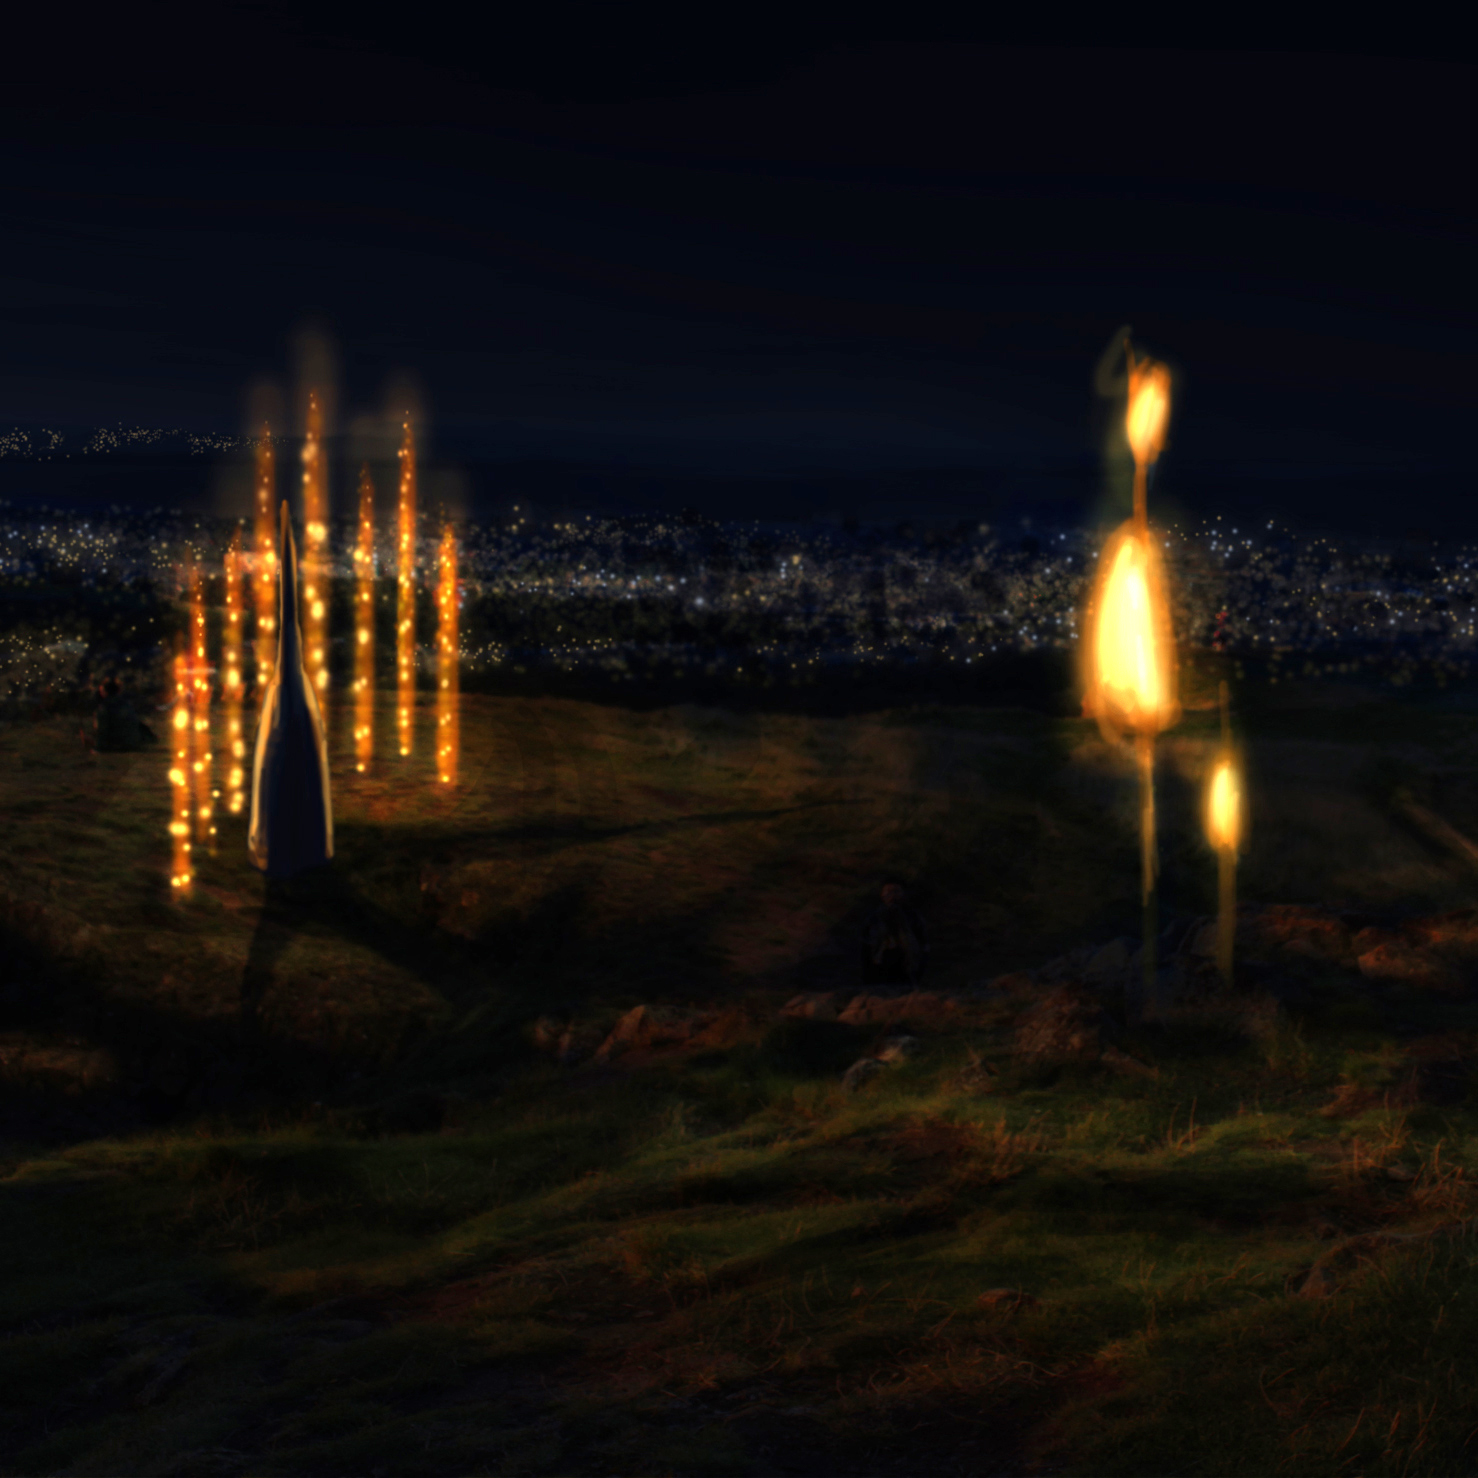 A digital storyboard illustration. On a dark hillside stands a tall silhouette among towers of lights. In the background is the glittering lights of a city.